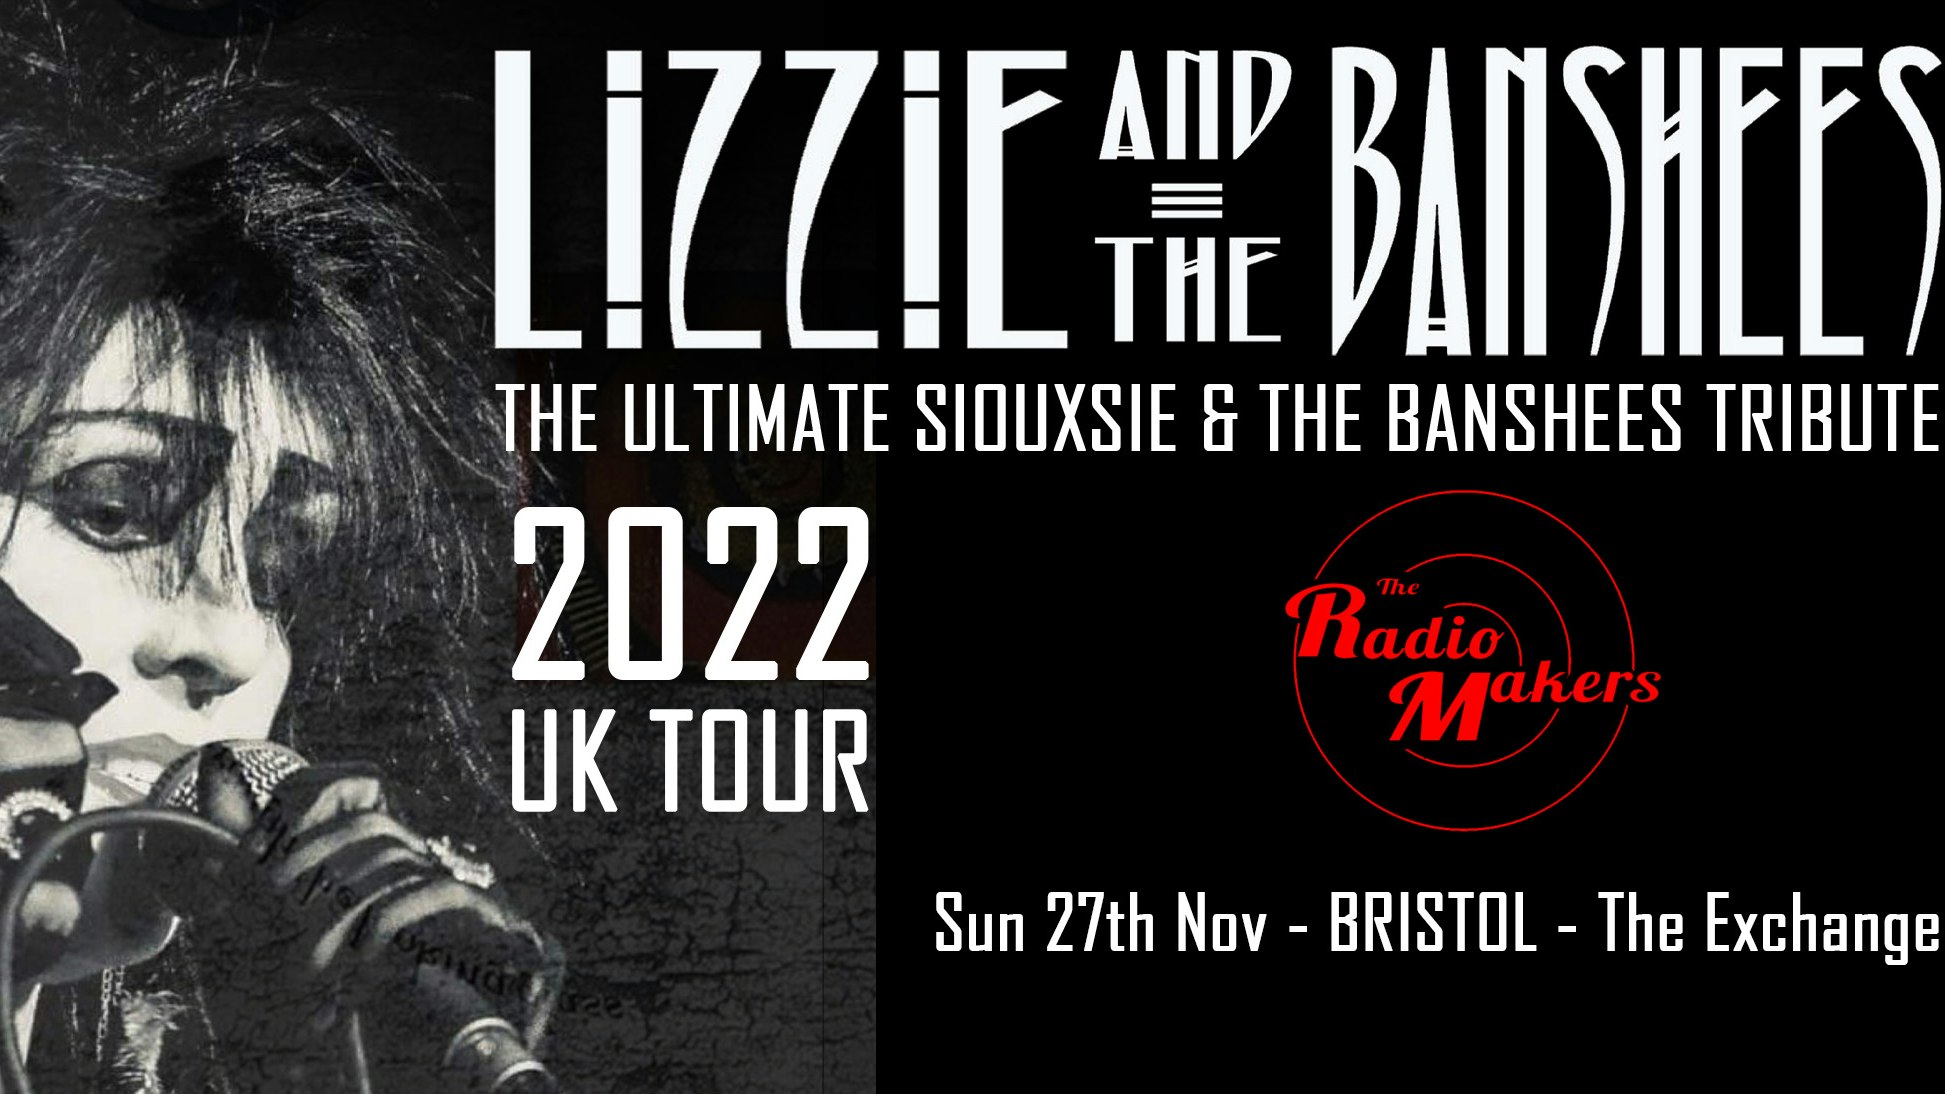 LIZZIE & THE BANSHEES – The Ultimate Siouxsie & The Banshees Tribute + the Radio Makers